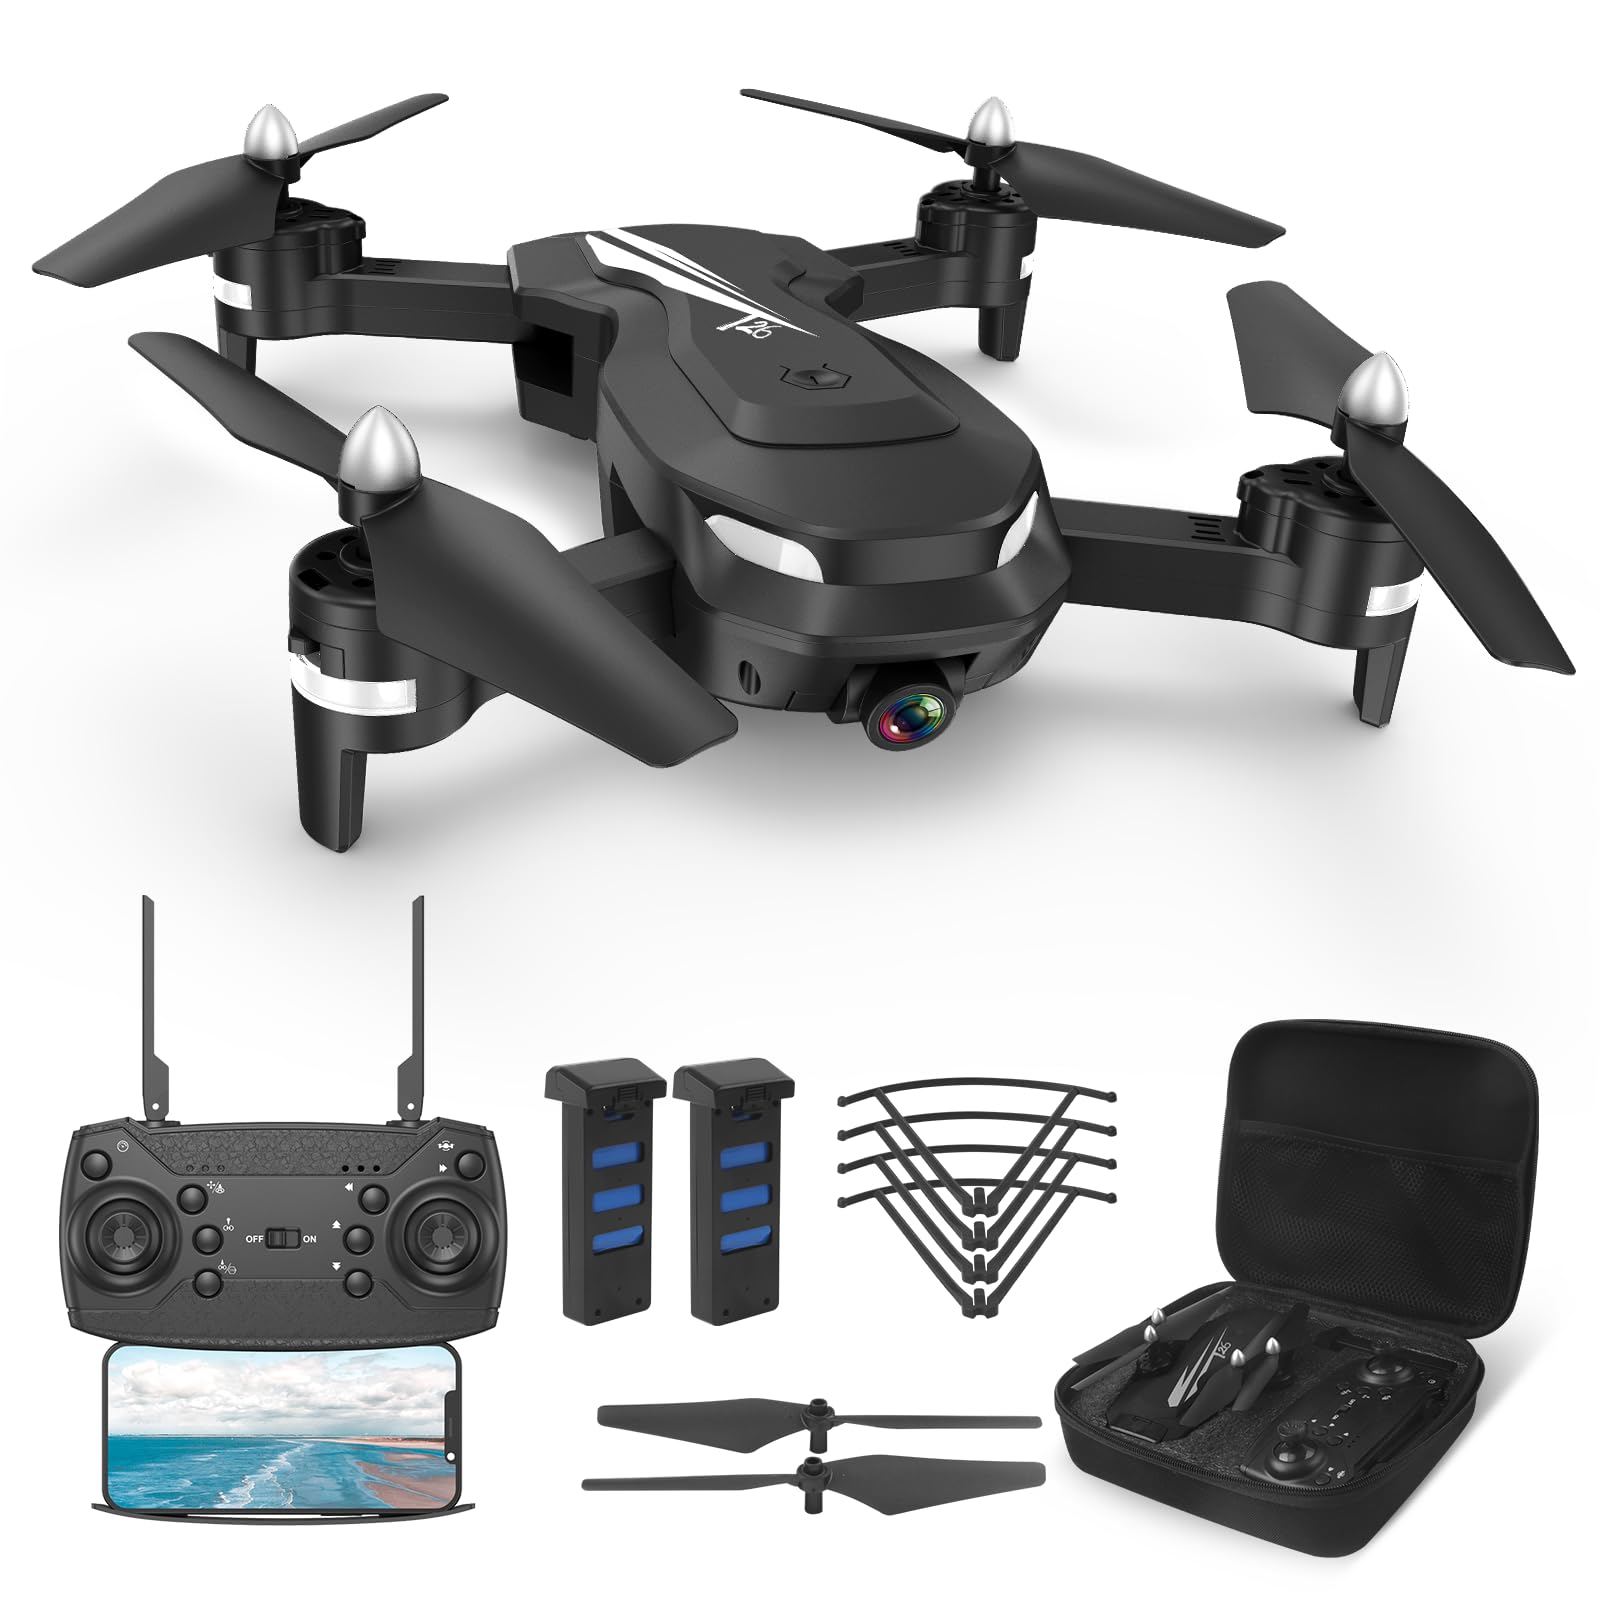 FERIETELF T26 Drones for Adults – 1080P HD RC Drone, Fpv Drone with Camera, With WiFi Live Video, Altitude Hold, Headless Mode, 3D Flip, Gravity Sensor, One Key Take Off/Landing for Kids or Beginners